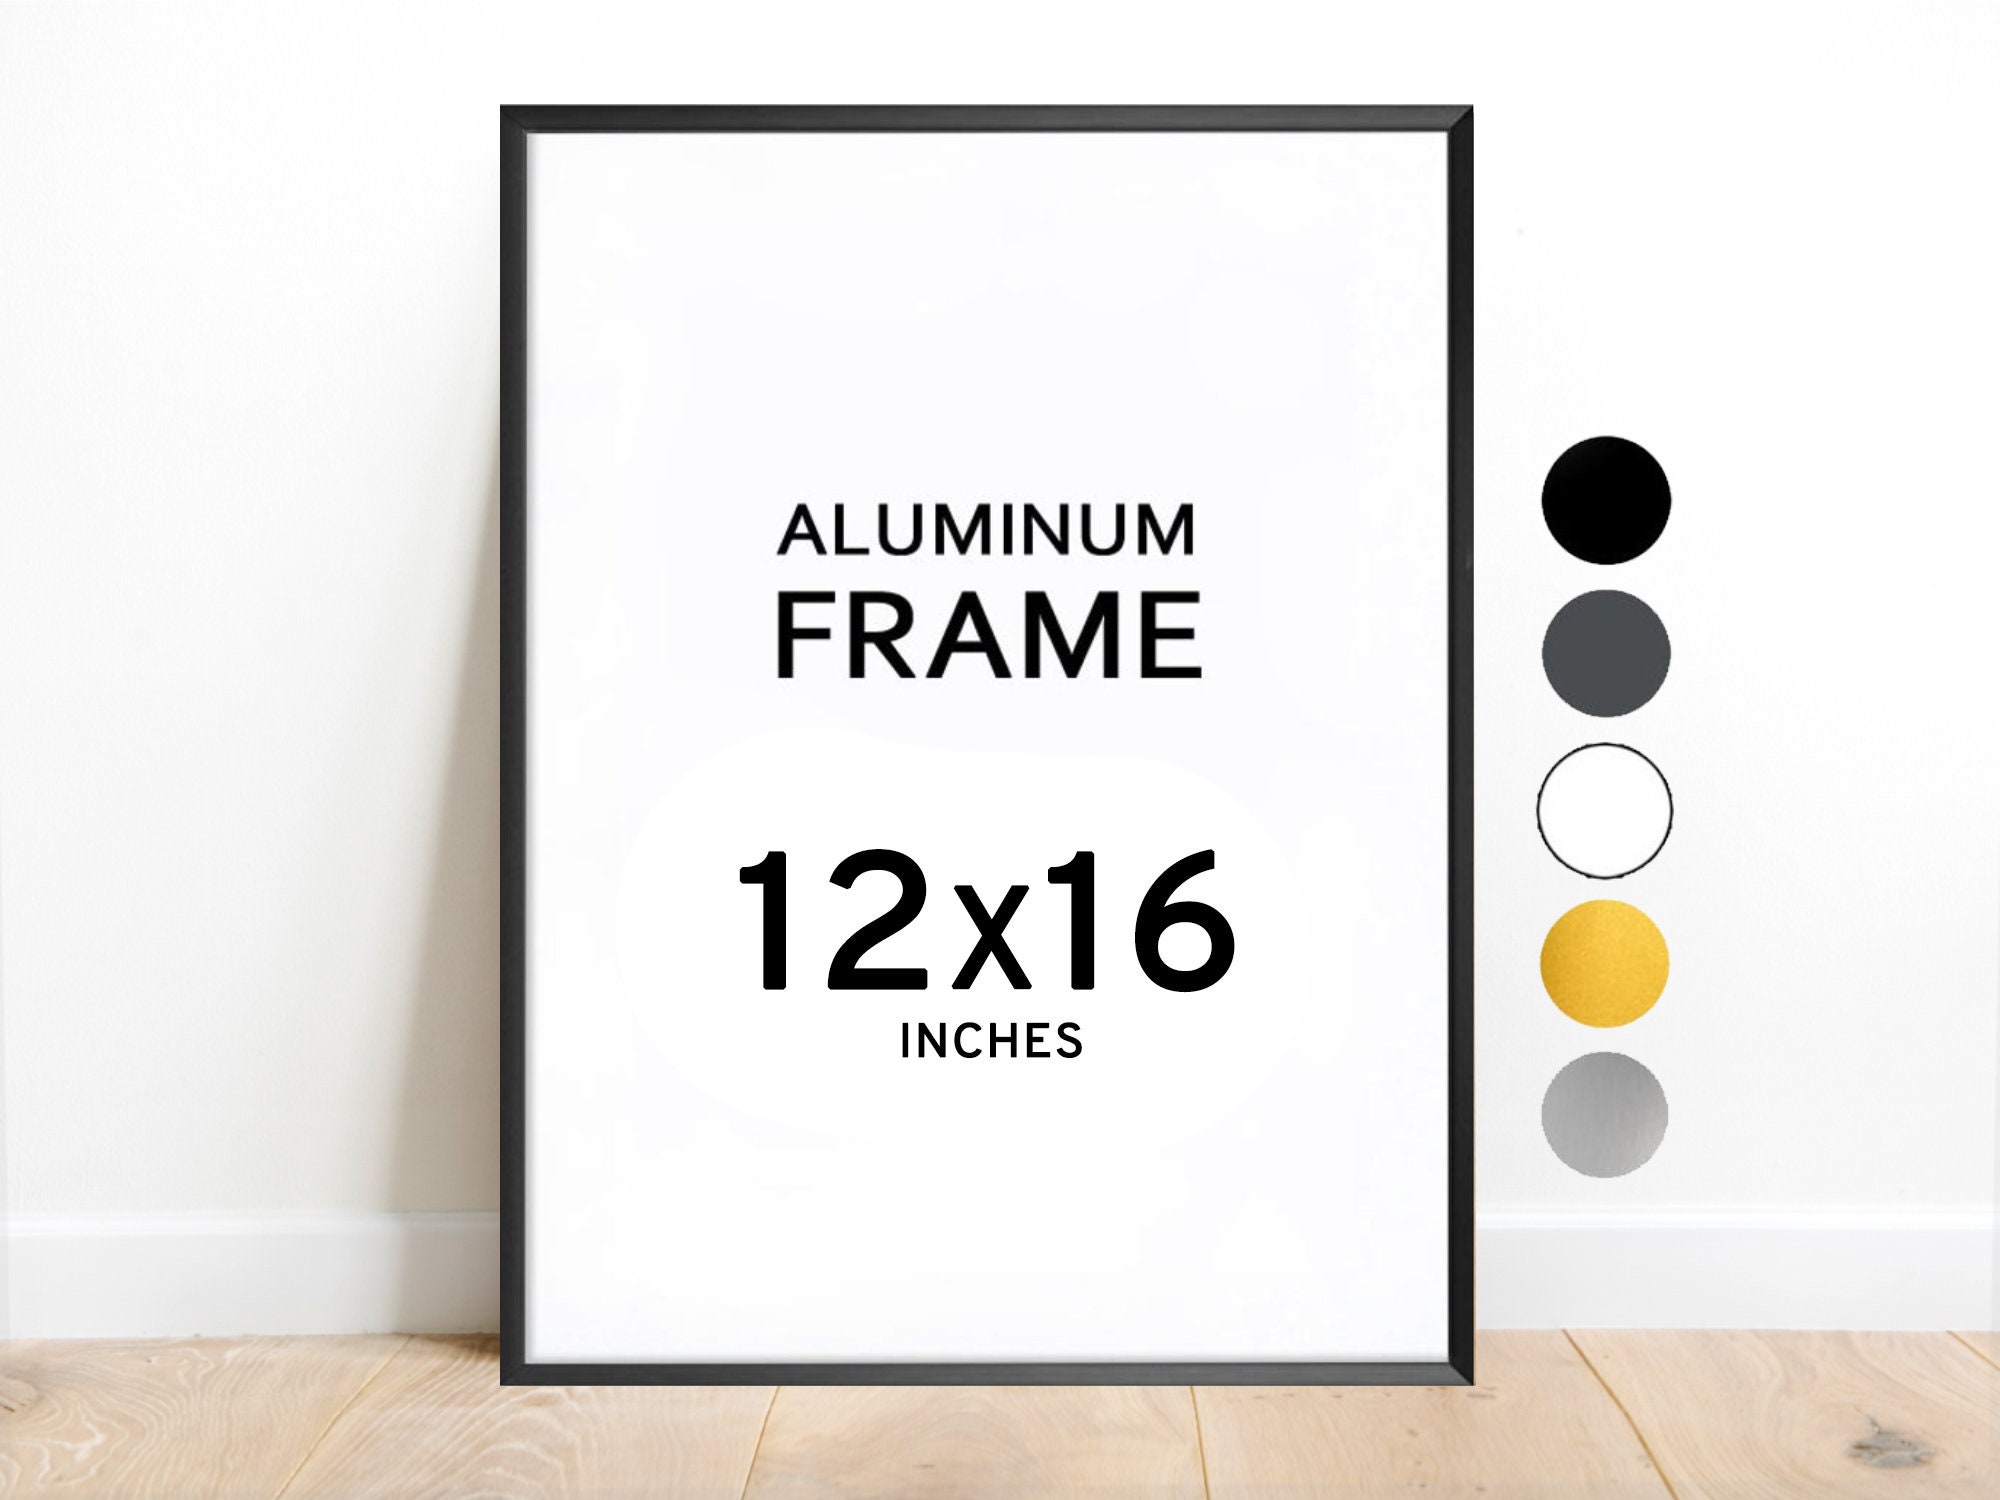 Clarification about Frame Sizes and Finding Out Mat Size/Image